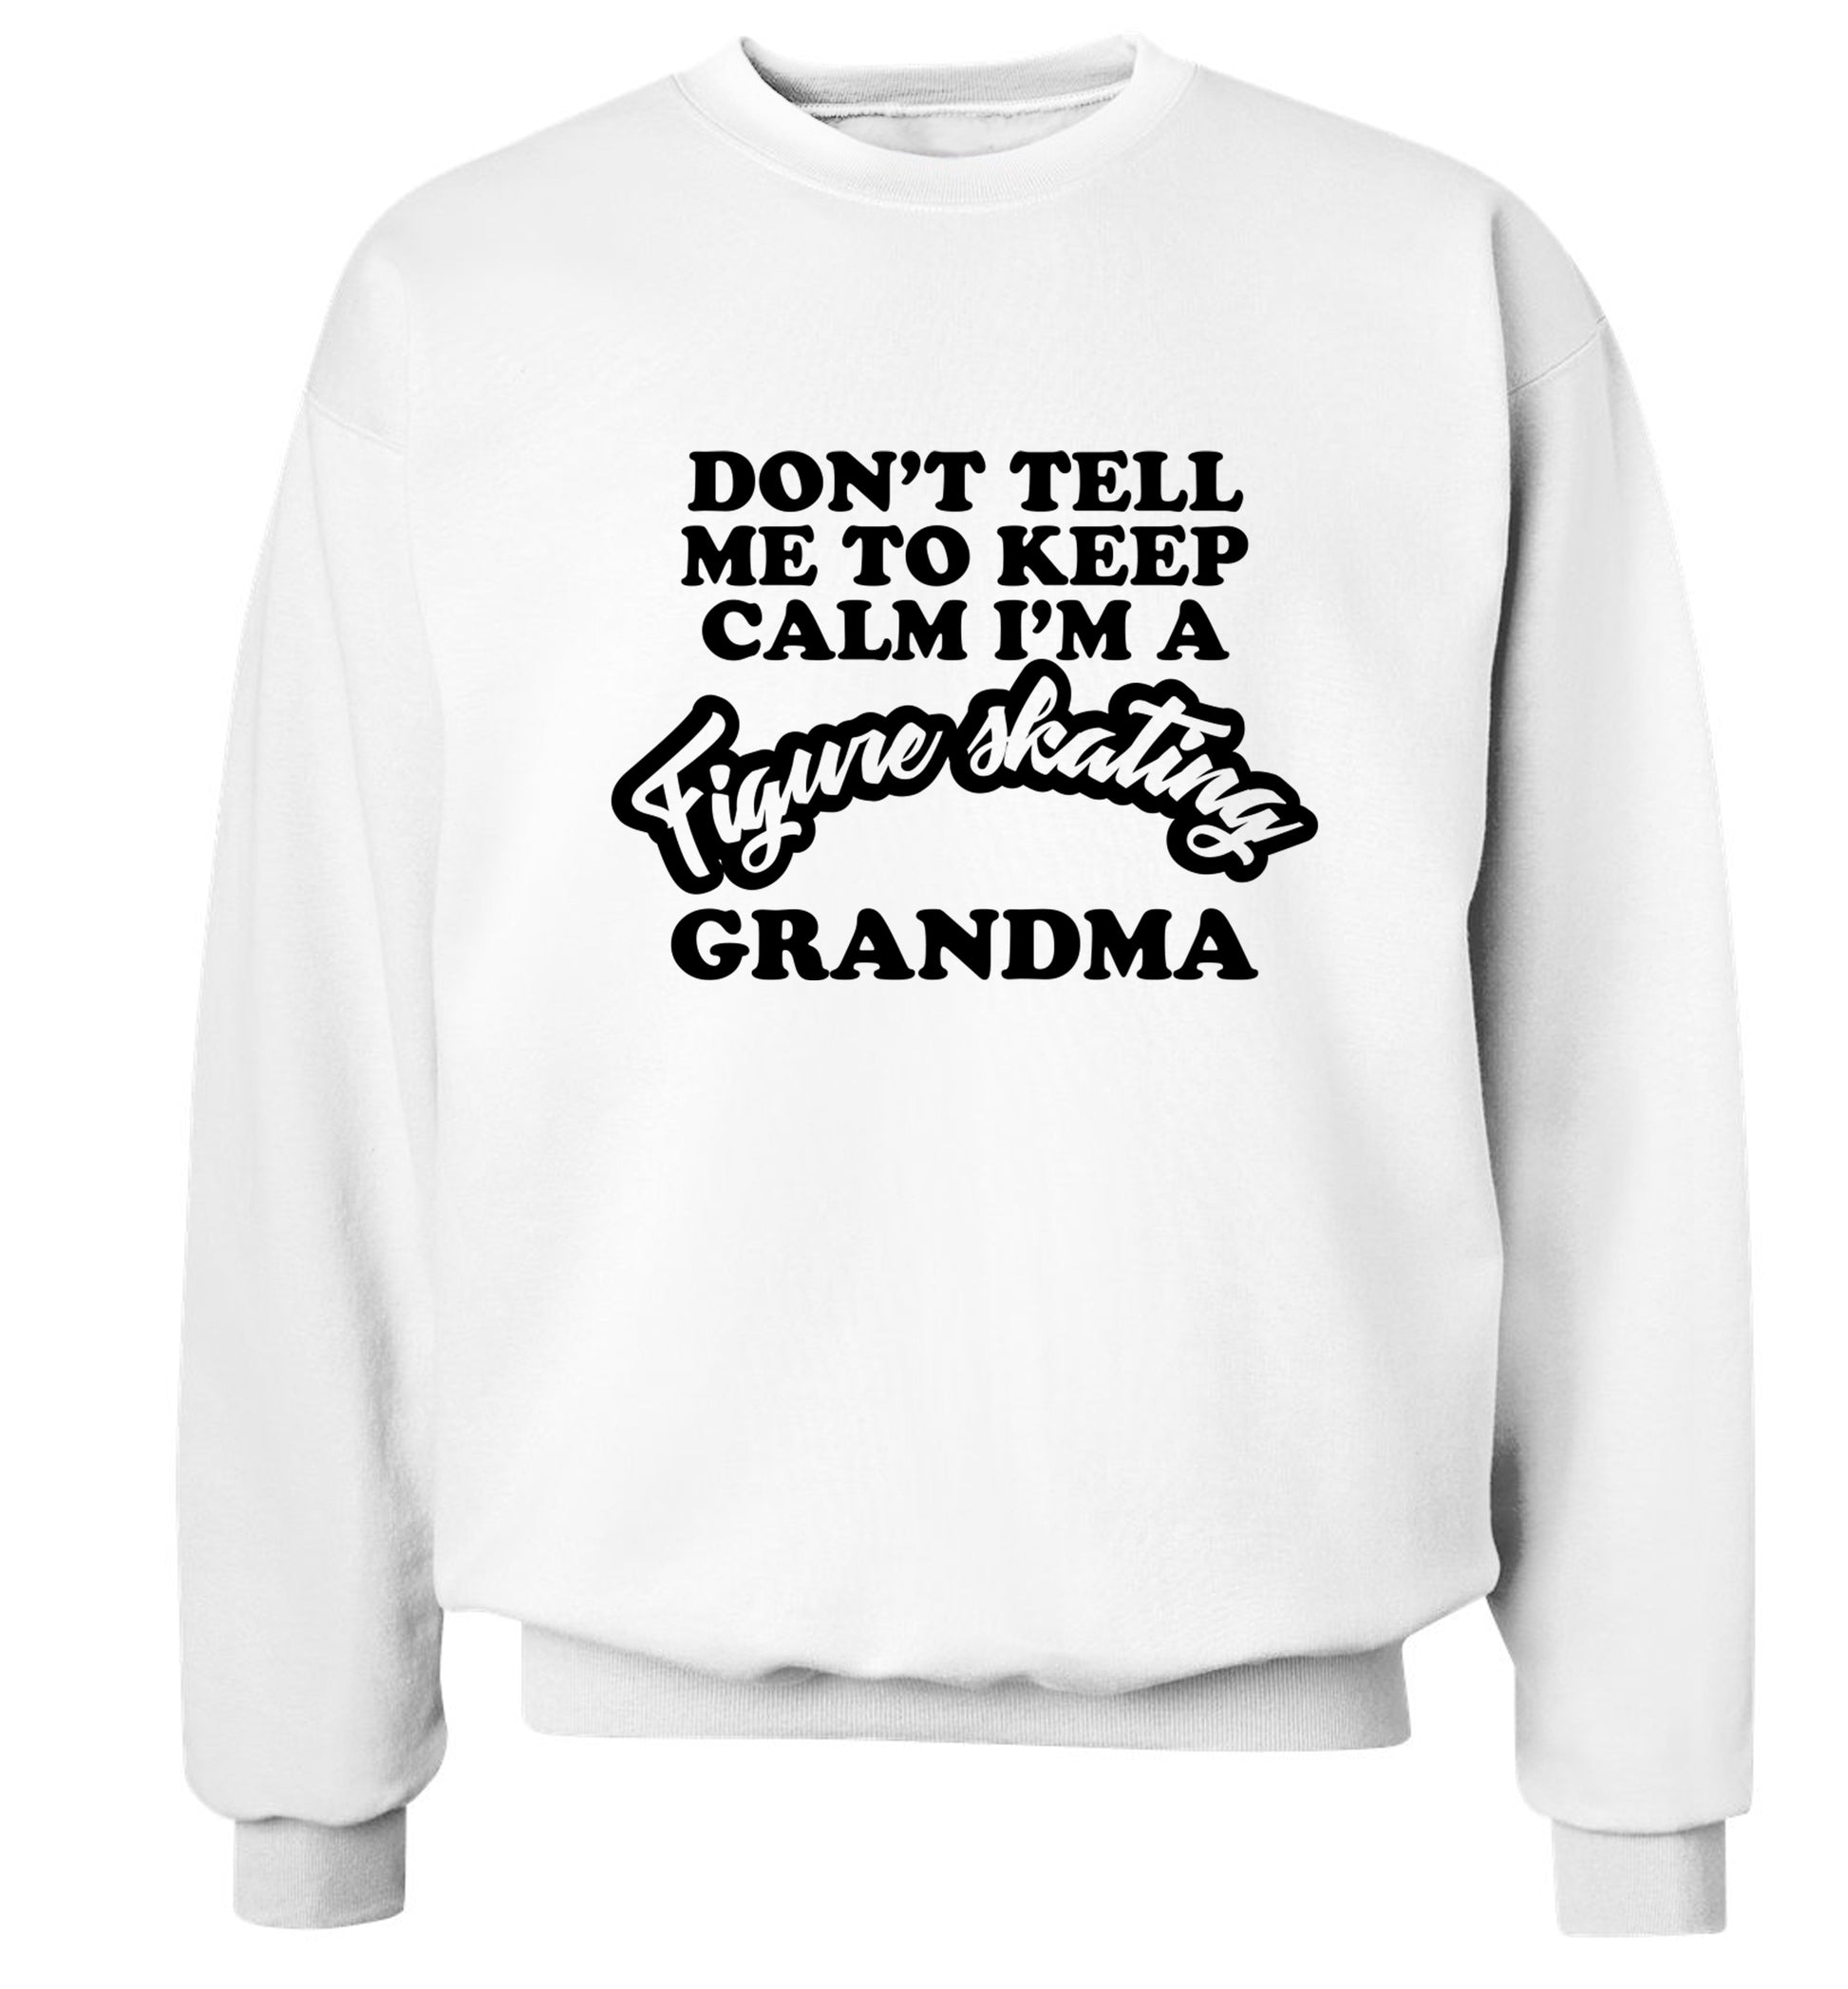 Don't tell me to keep calm I'm a figure skating grandma Adult's unisexwhite Sweater 2XL